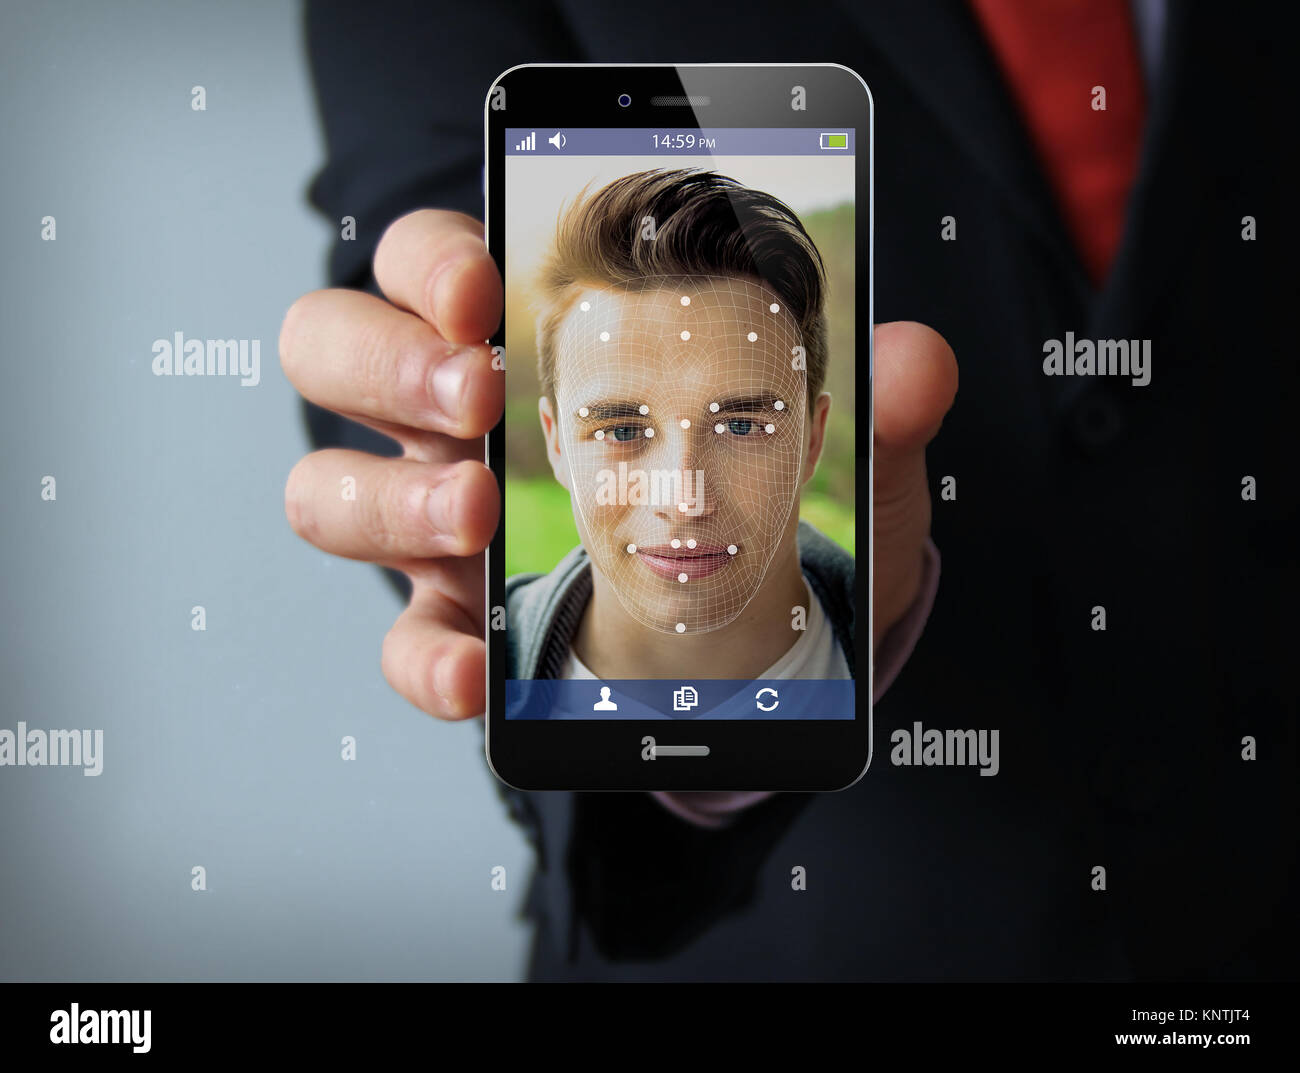 new technologies concept: businessman showing smartphone with face id technology on the screen. Screen graphics are made up. Stock Photo